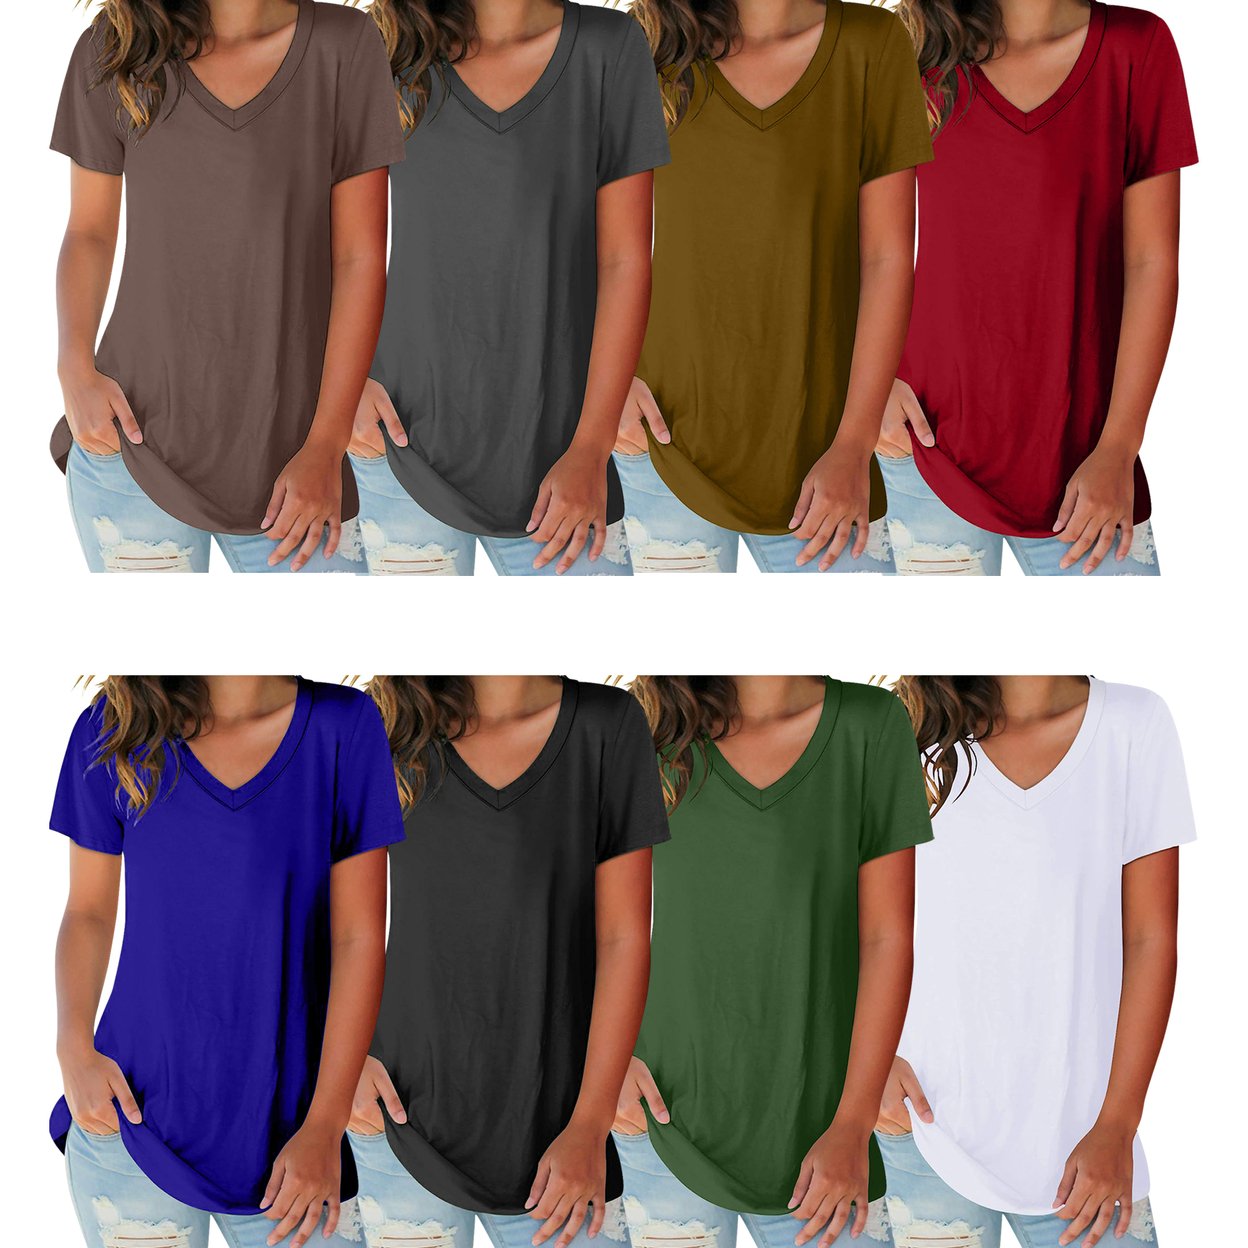 2-Pack: Women's Ultra Soft Smooth Cotton Blend Basic V-Neck Short Sleeve Shirts - White & Green, Small